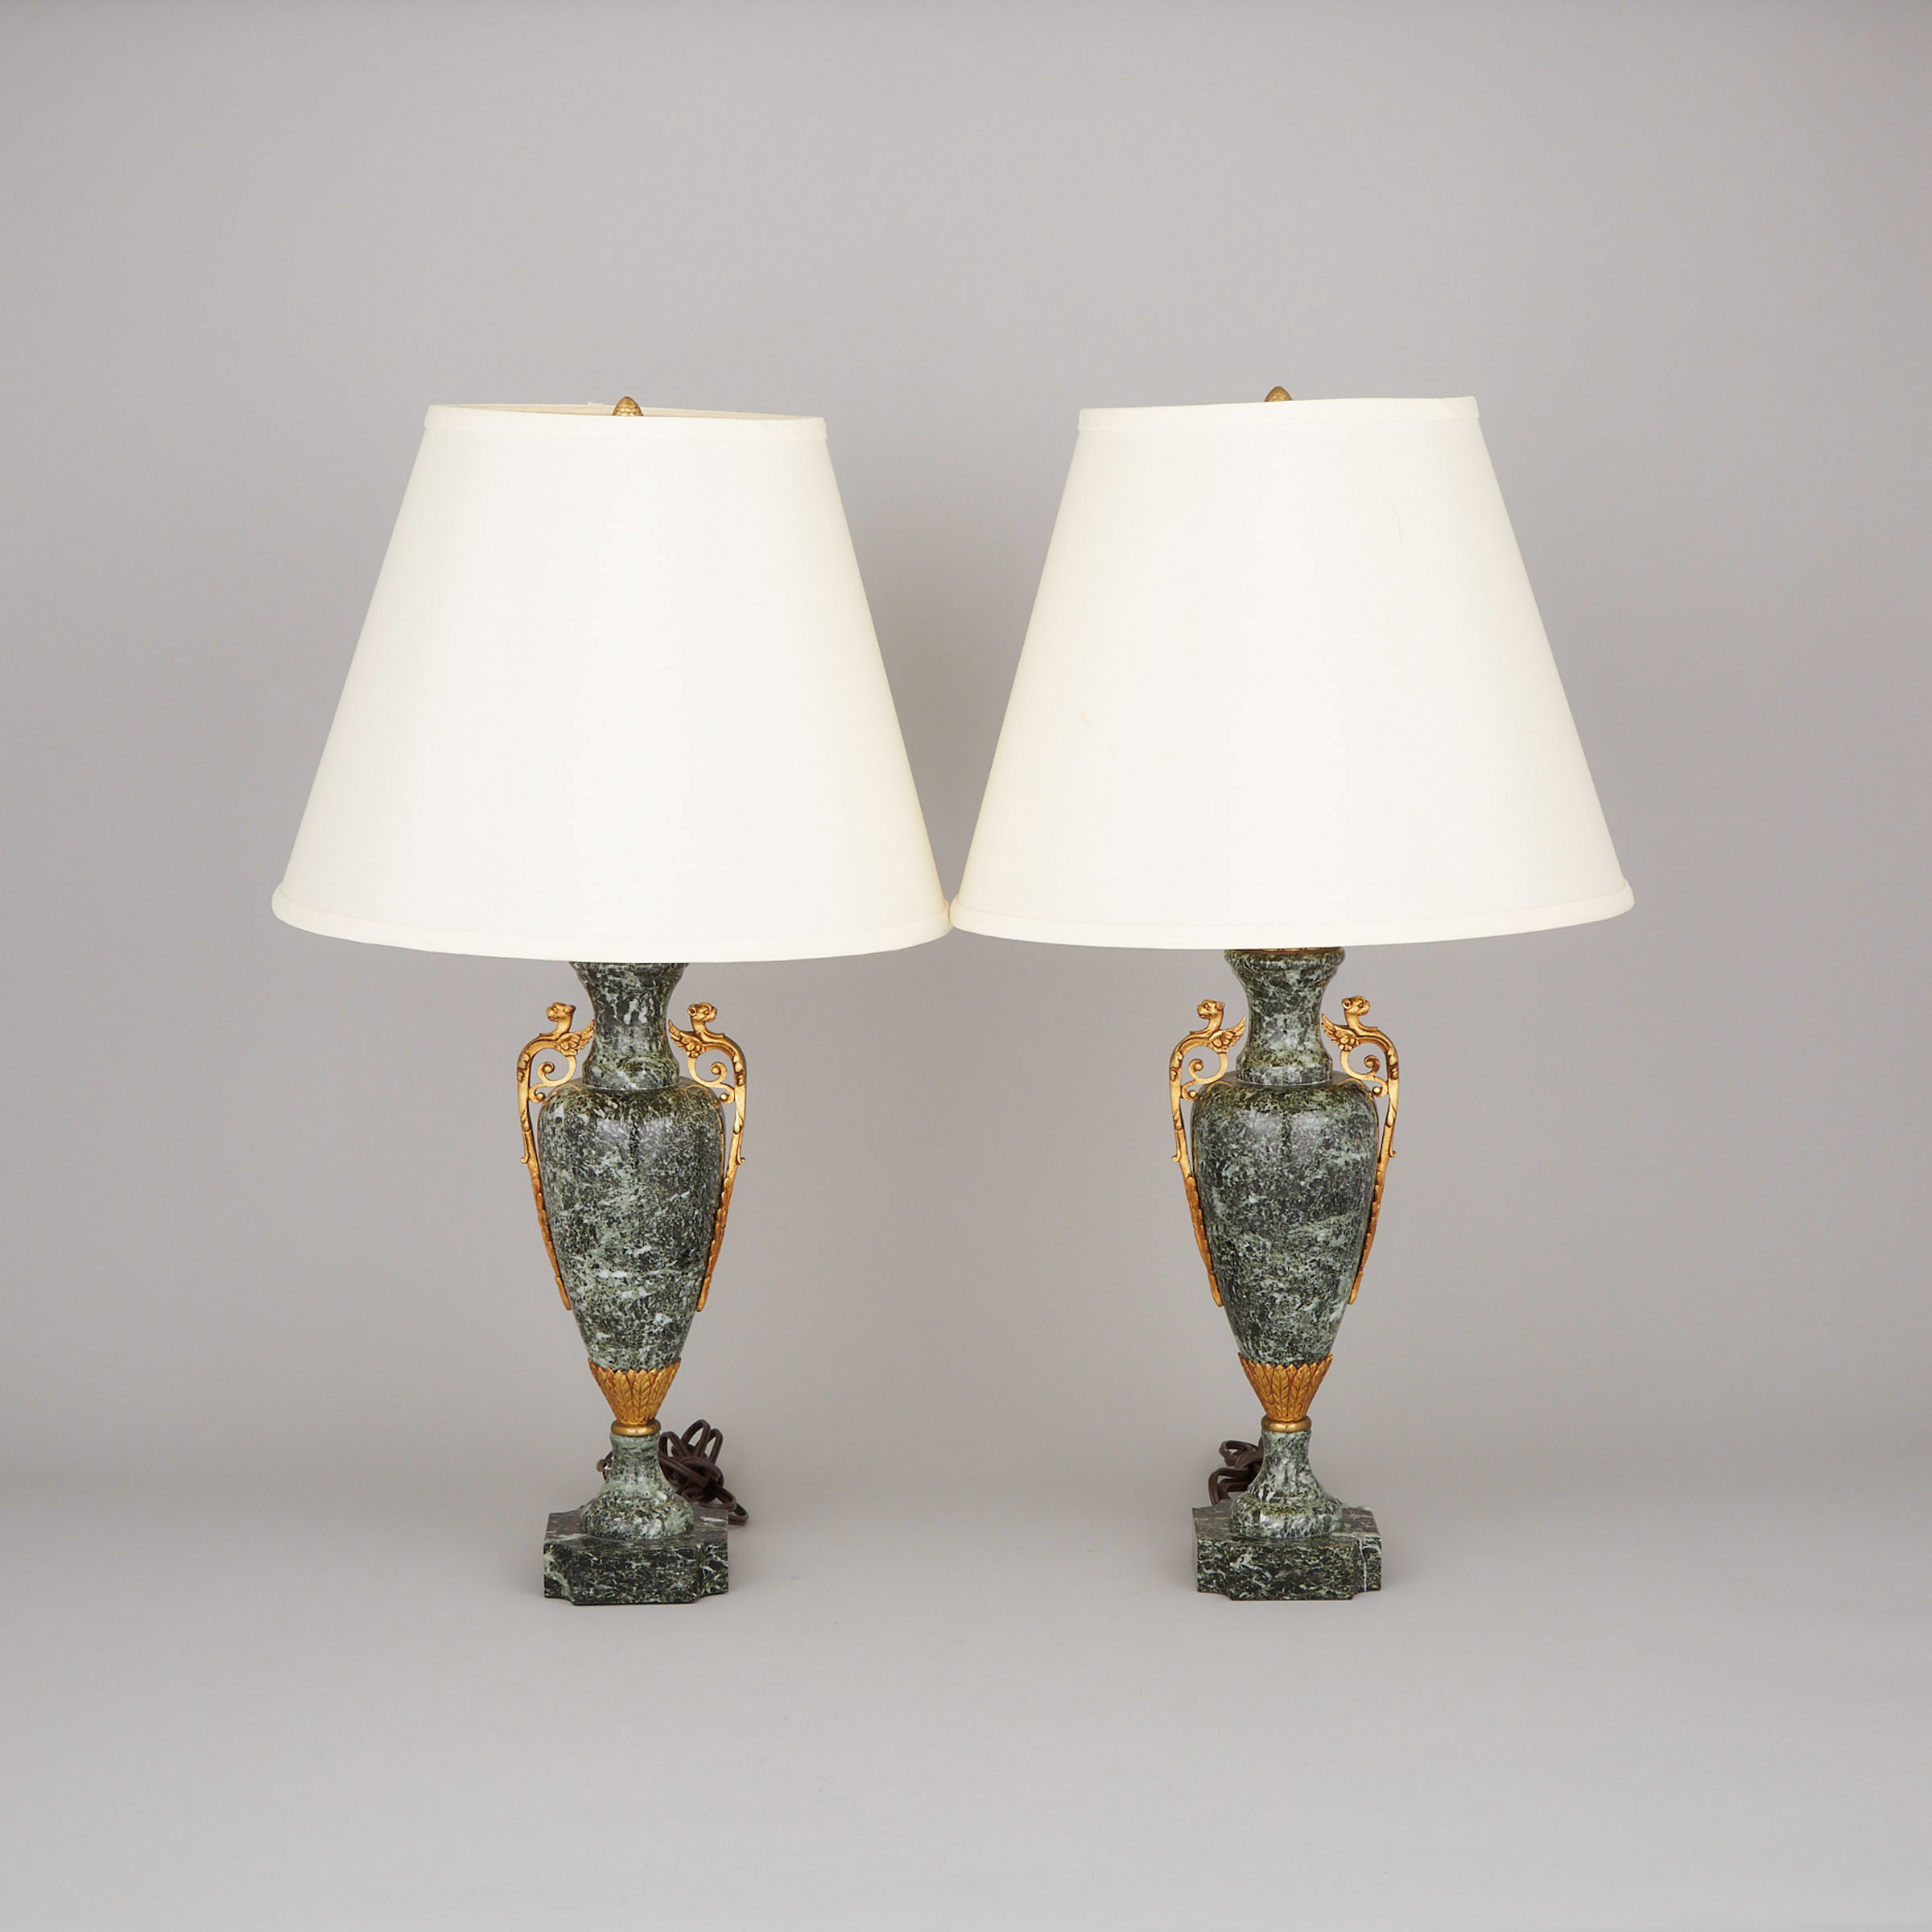 Pair of Belgian Ormolu Mounted Verde Antique Marble Urn Form Table Lamps, mid 20th century